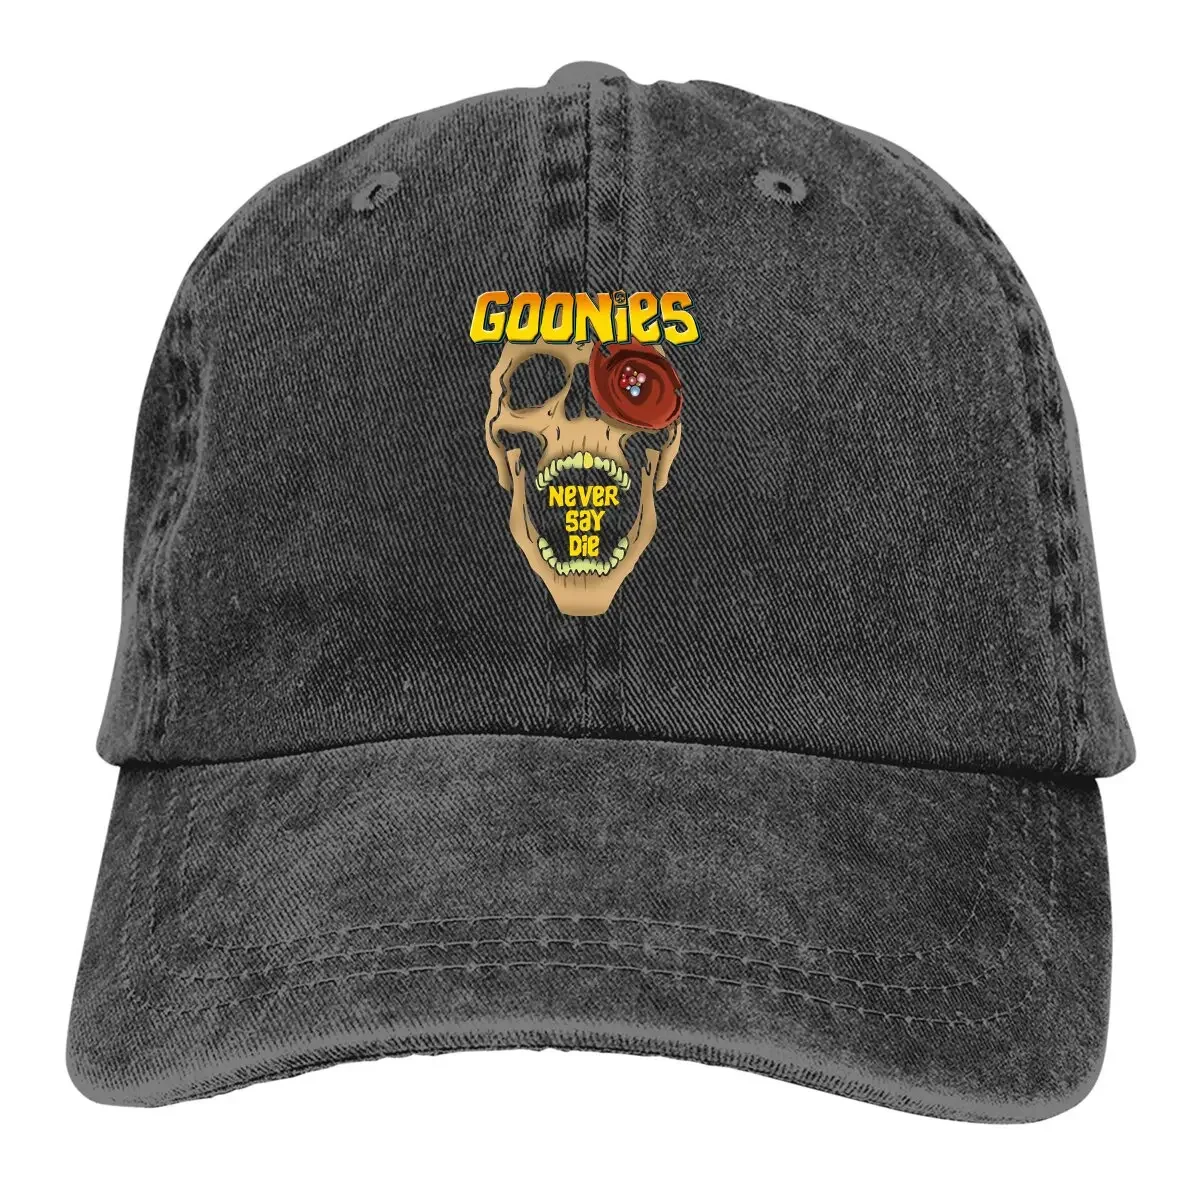 

Washed Men's Baseball Cap Never Say Die Classic Trucker Snapback Caps Dad Hat The Goonies Movie Golf Hats